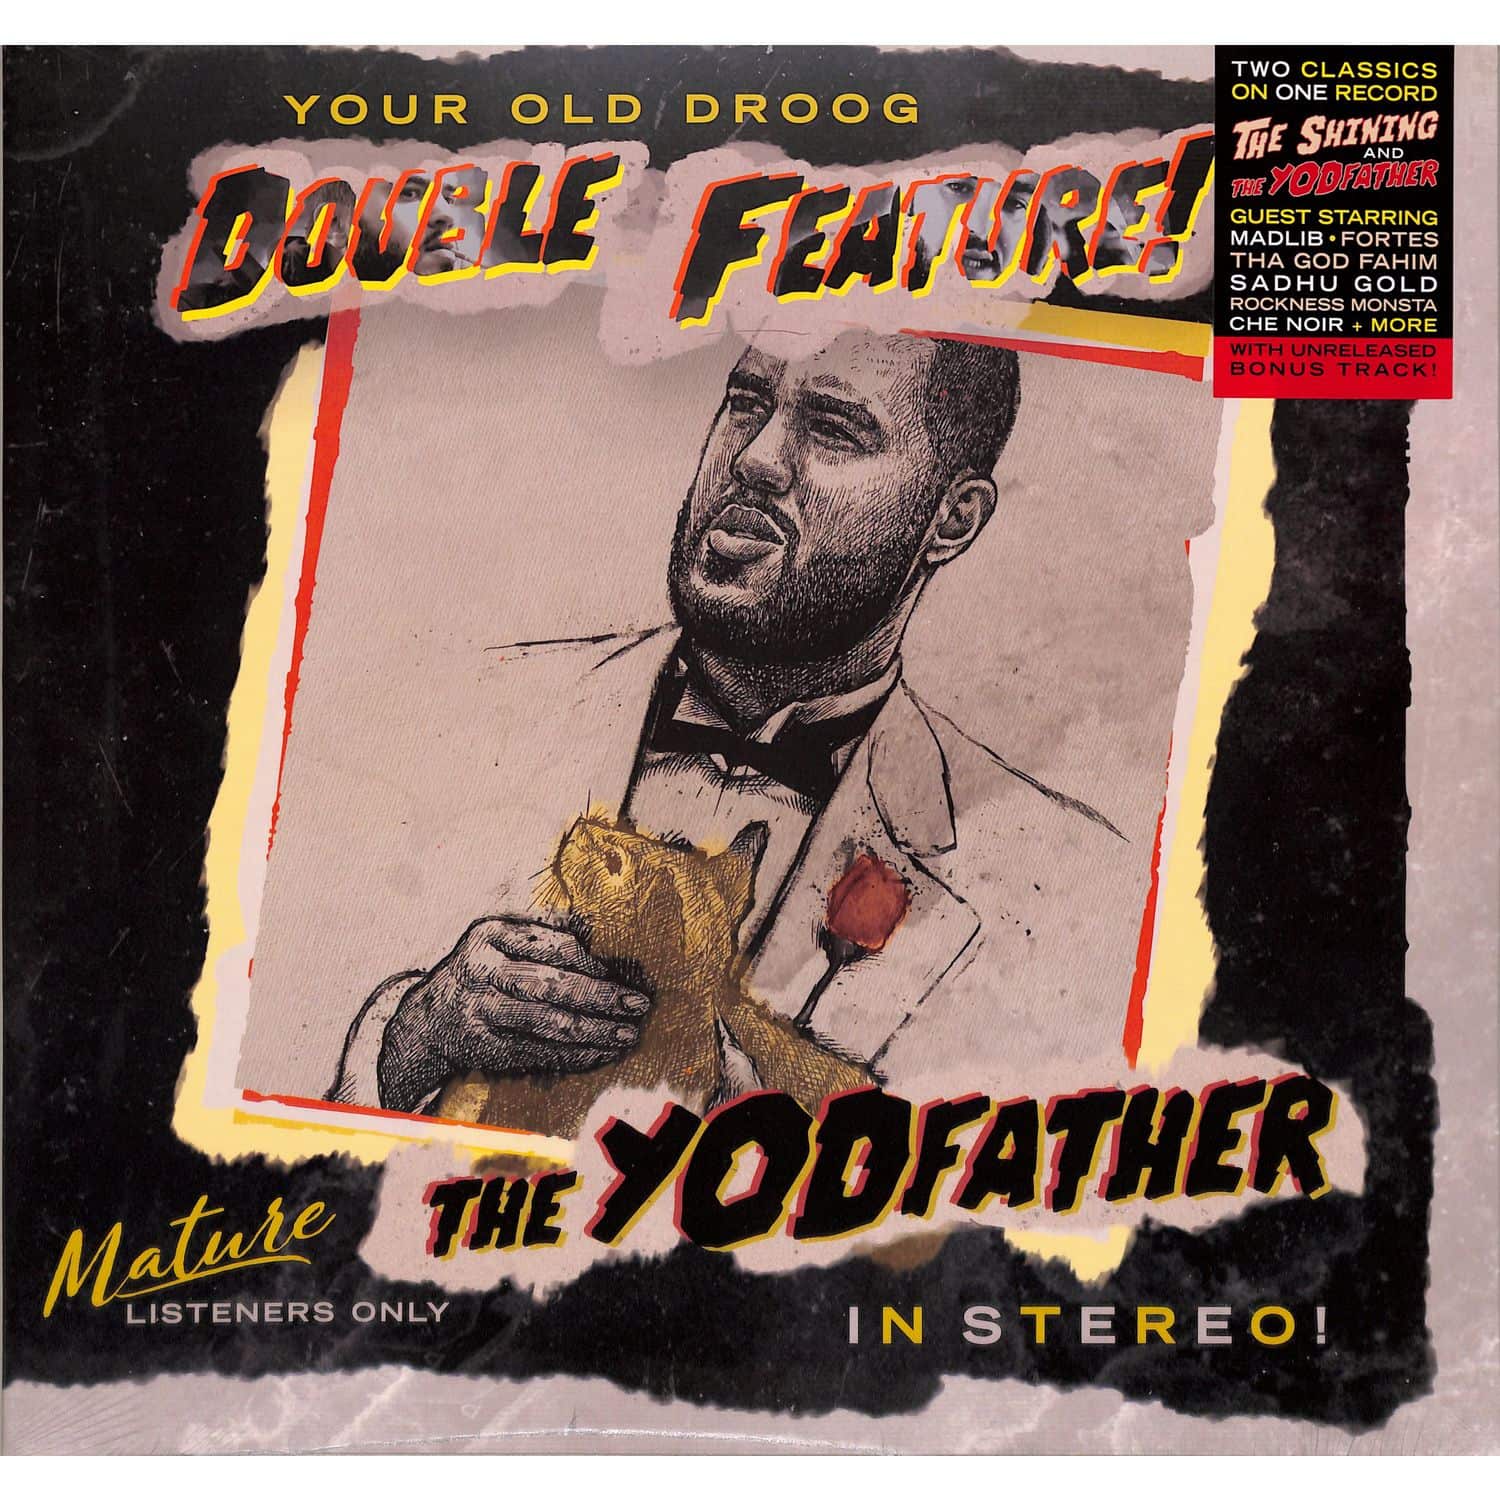 Your Old Droog - THE YODFATHER / THE SHINING 